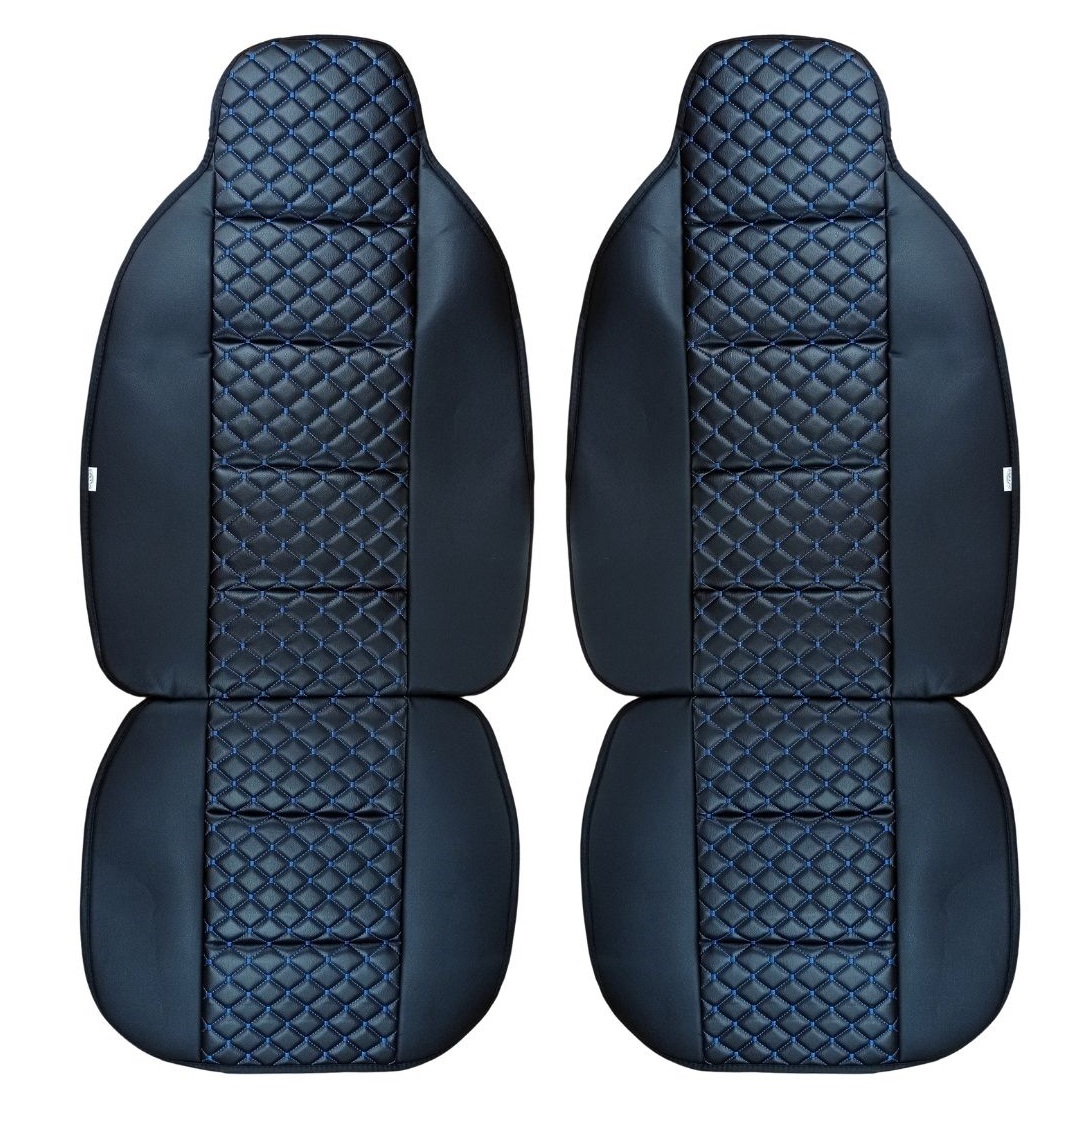 Seat covers Protector for Cars Universal Black Blue Eco Leather 